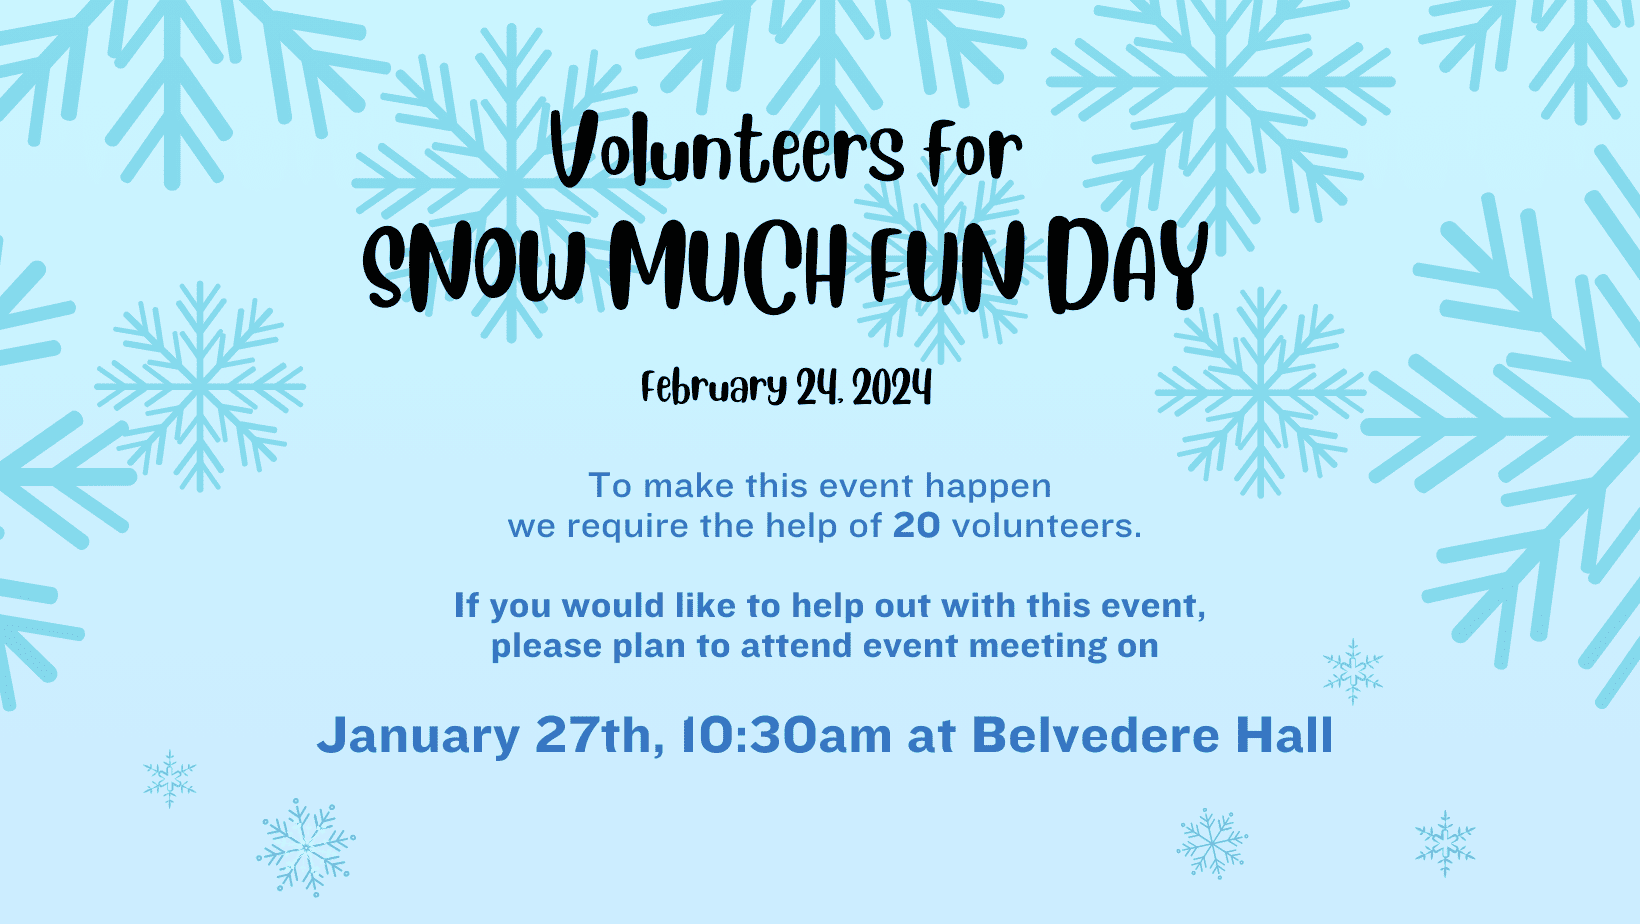 Volunteers Needed for Snow Much Fun Day